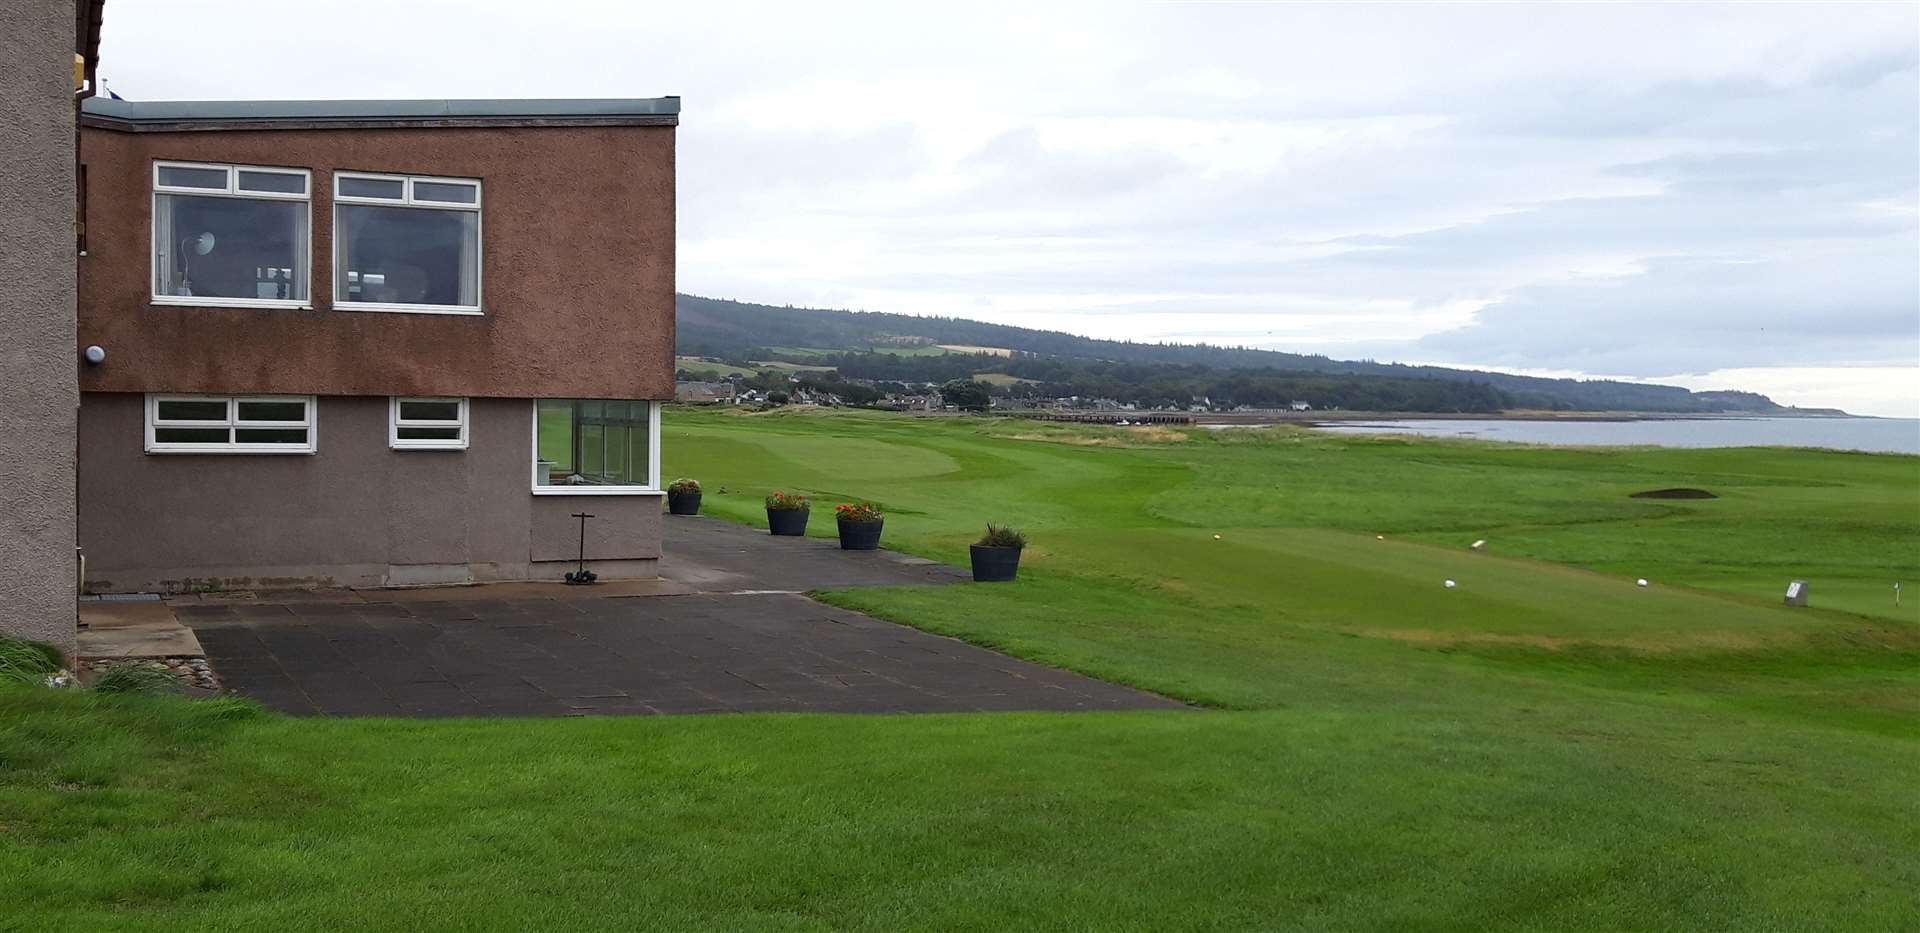 Golspie Golf Club owns its clubhouse and car park, but the land the course runs over belongs to Sutherland Estates.